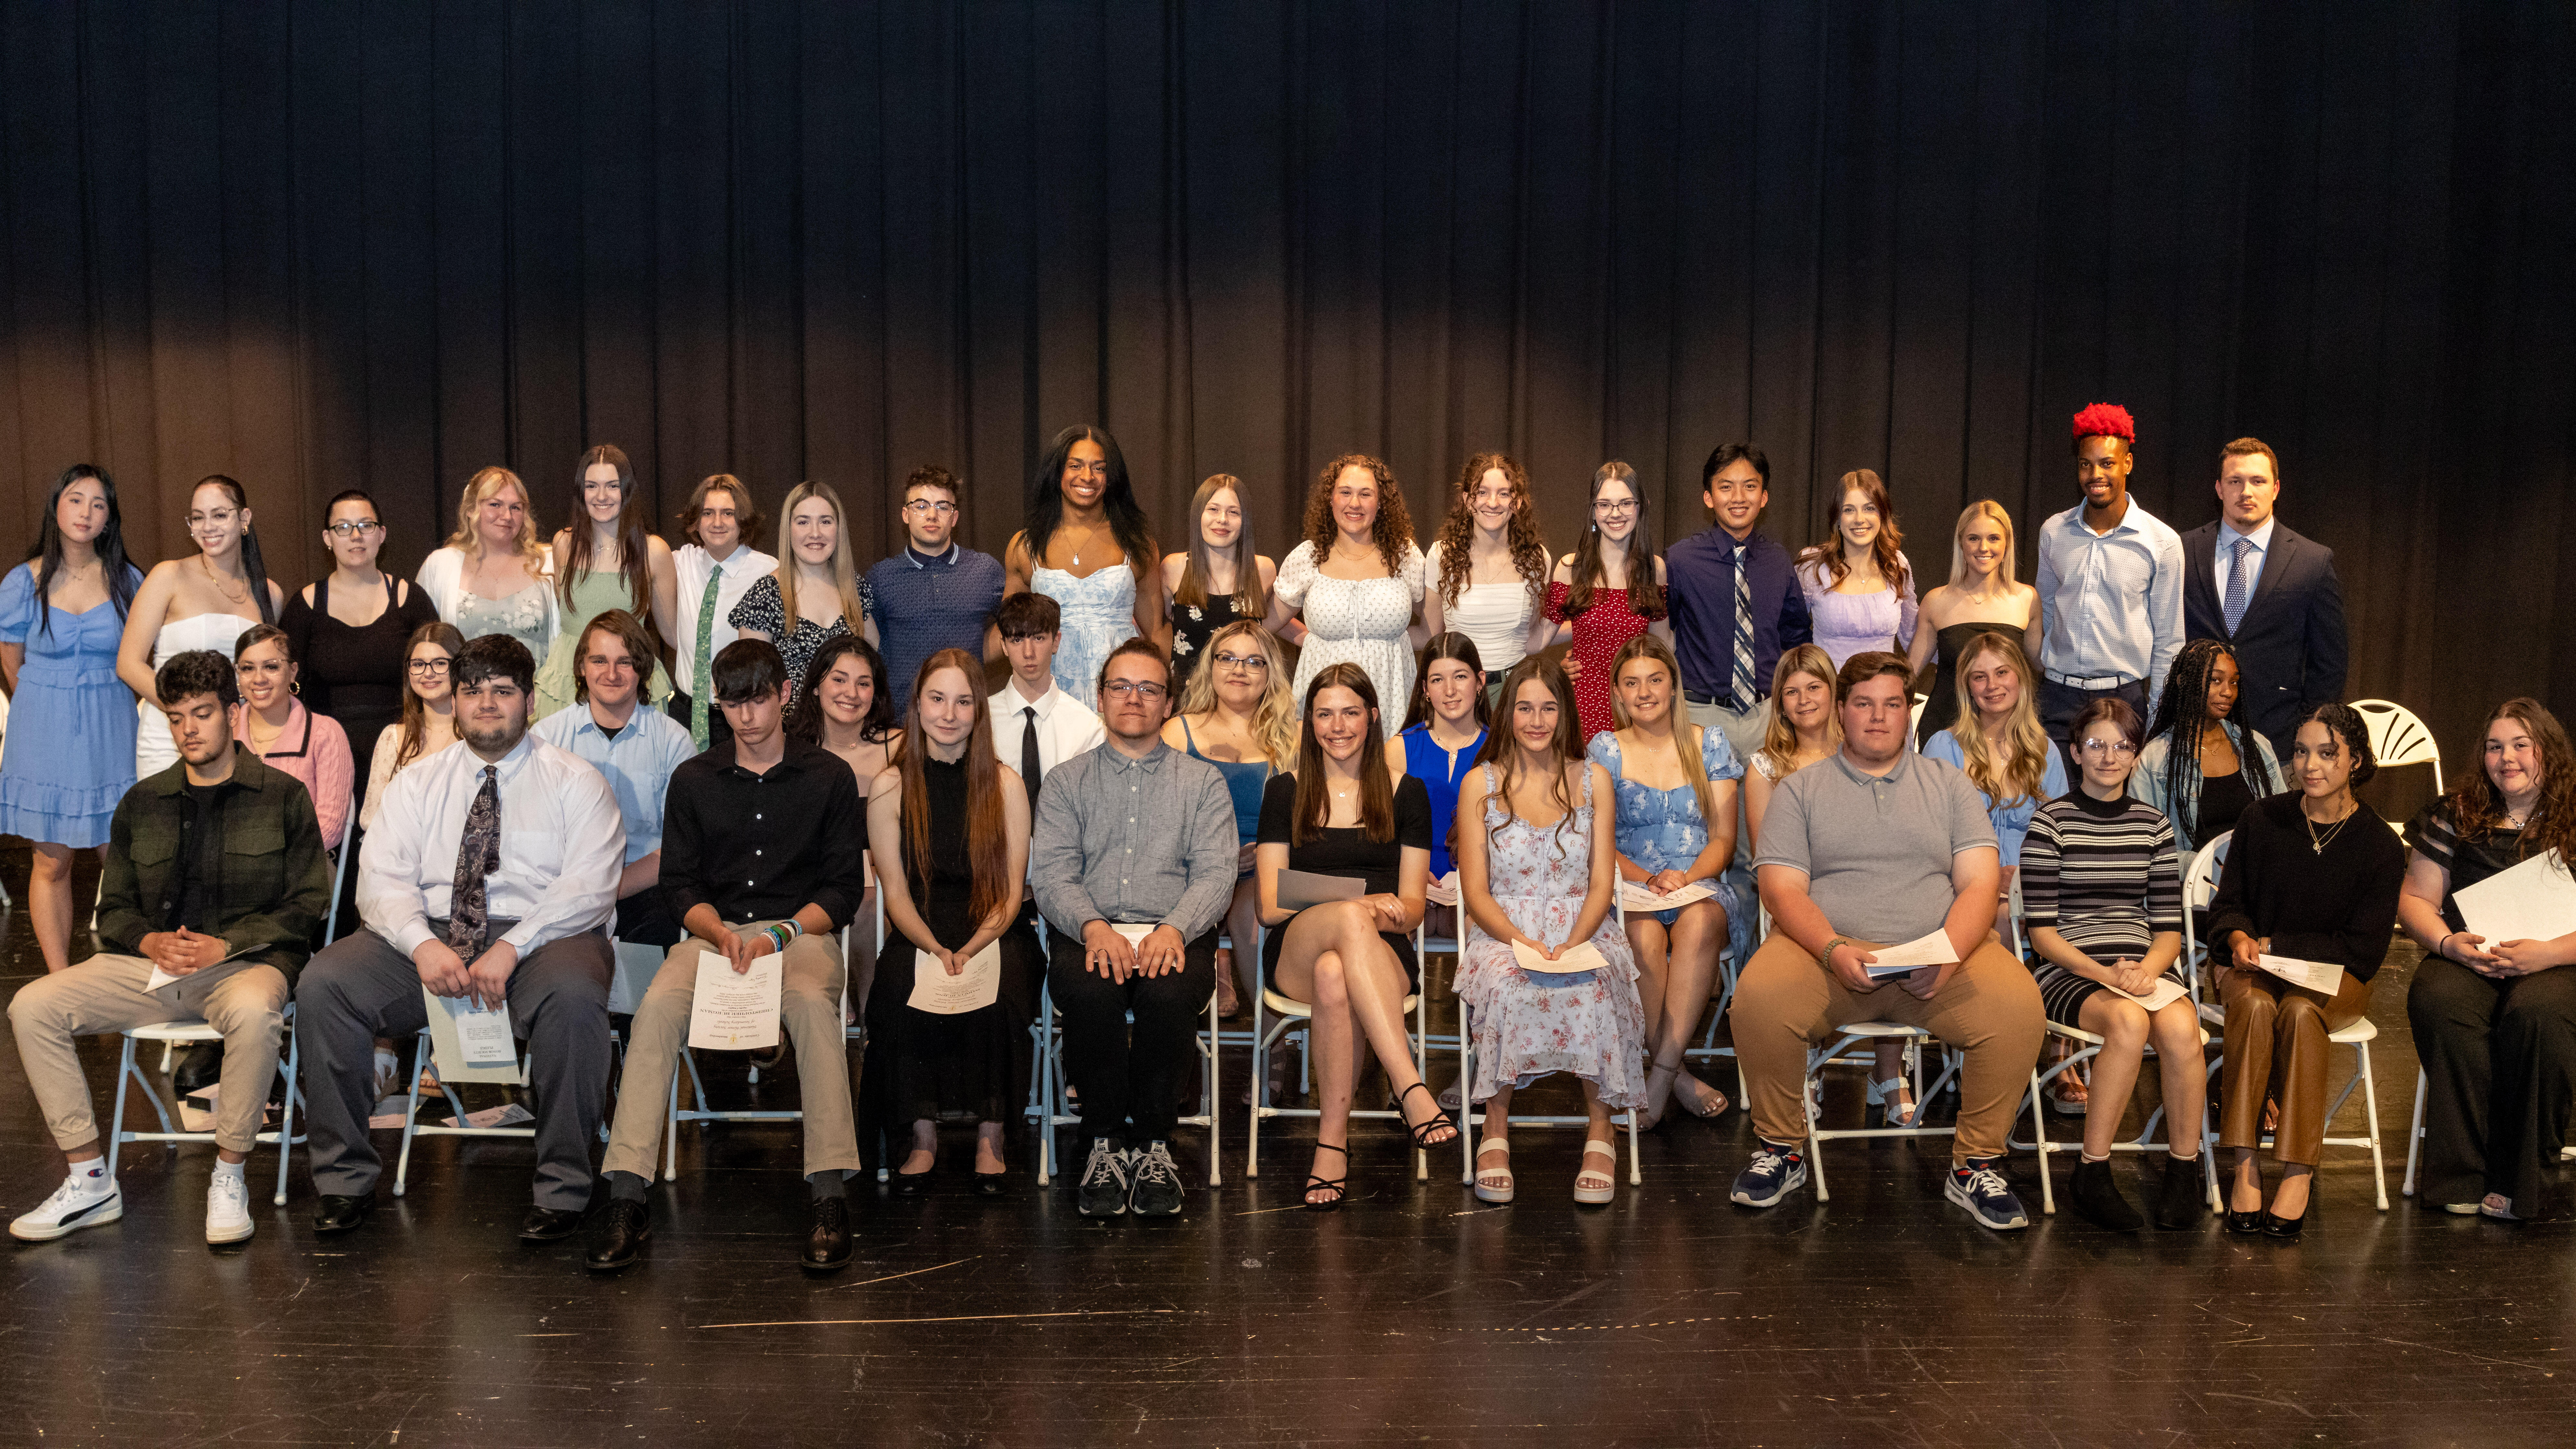  Steel Valley inducts 22 new members into high school National Honor Society